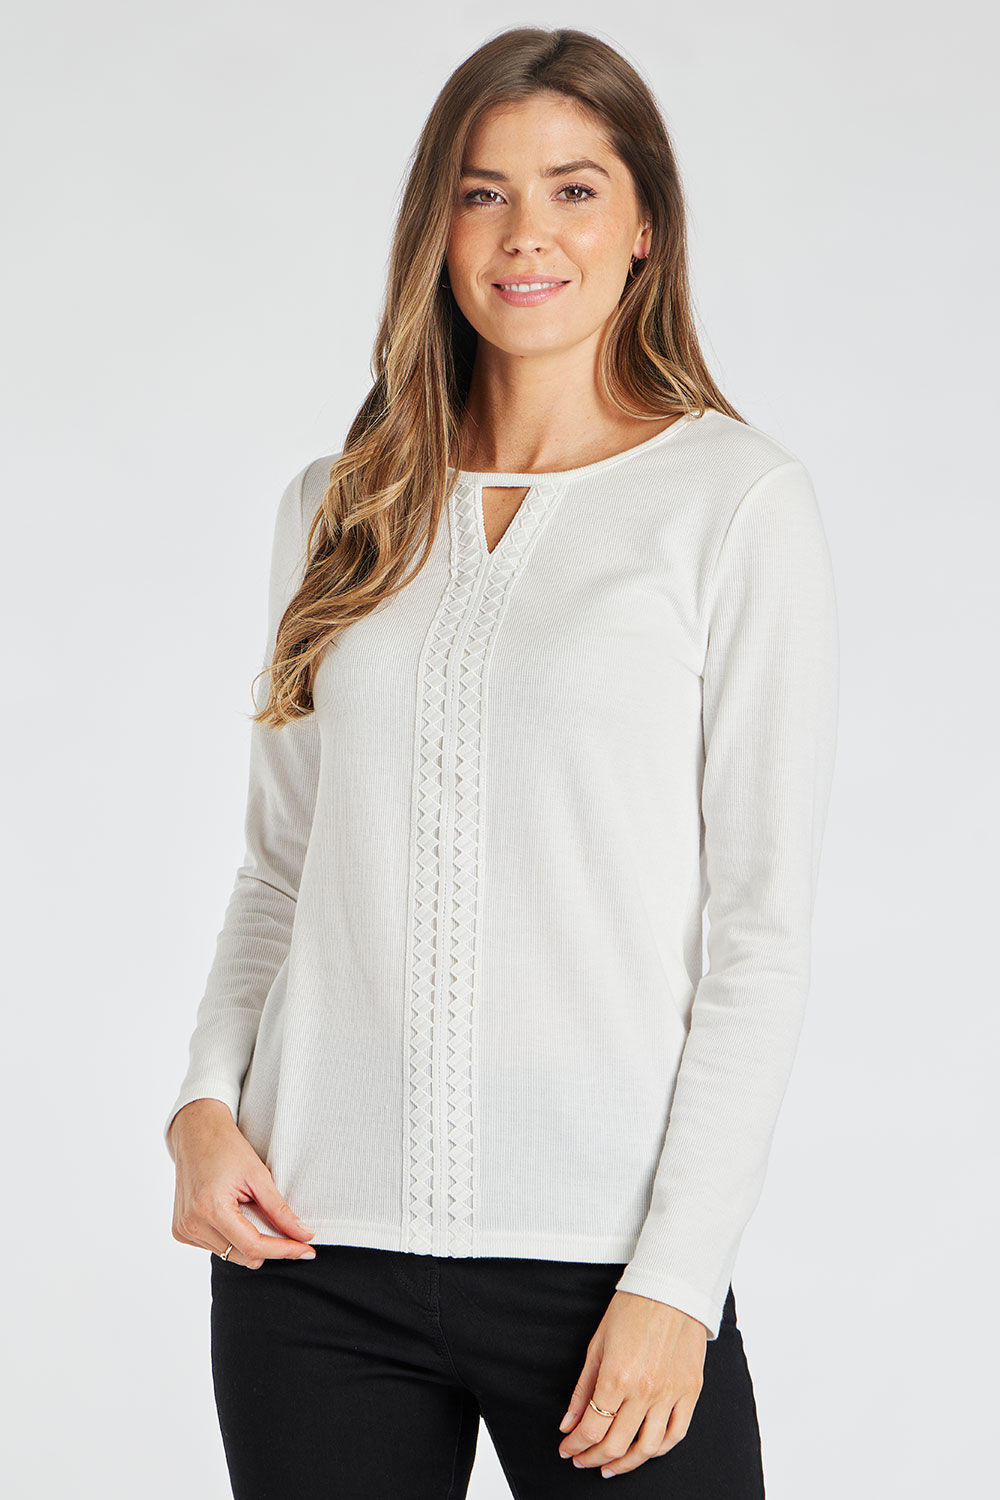 Bonmarche Ivory Long Sleeve Lace Front Rib Back Top With Notch Detail, Size: 10